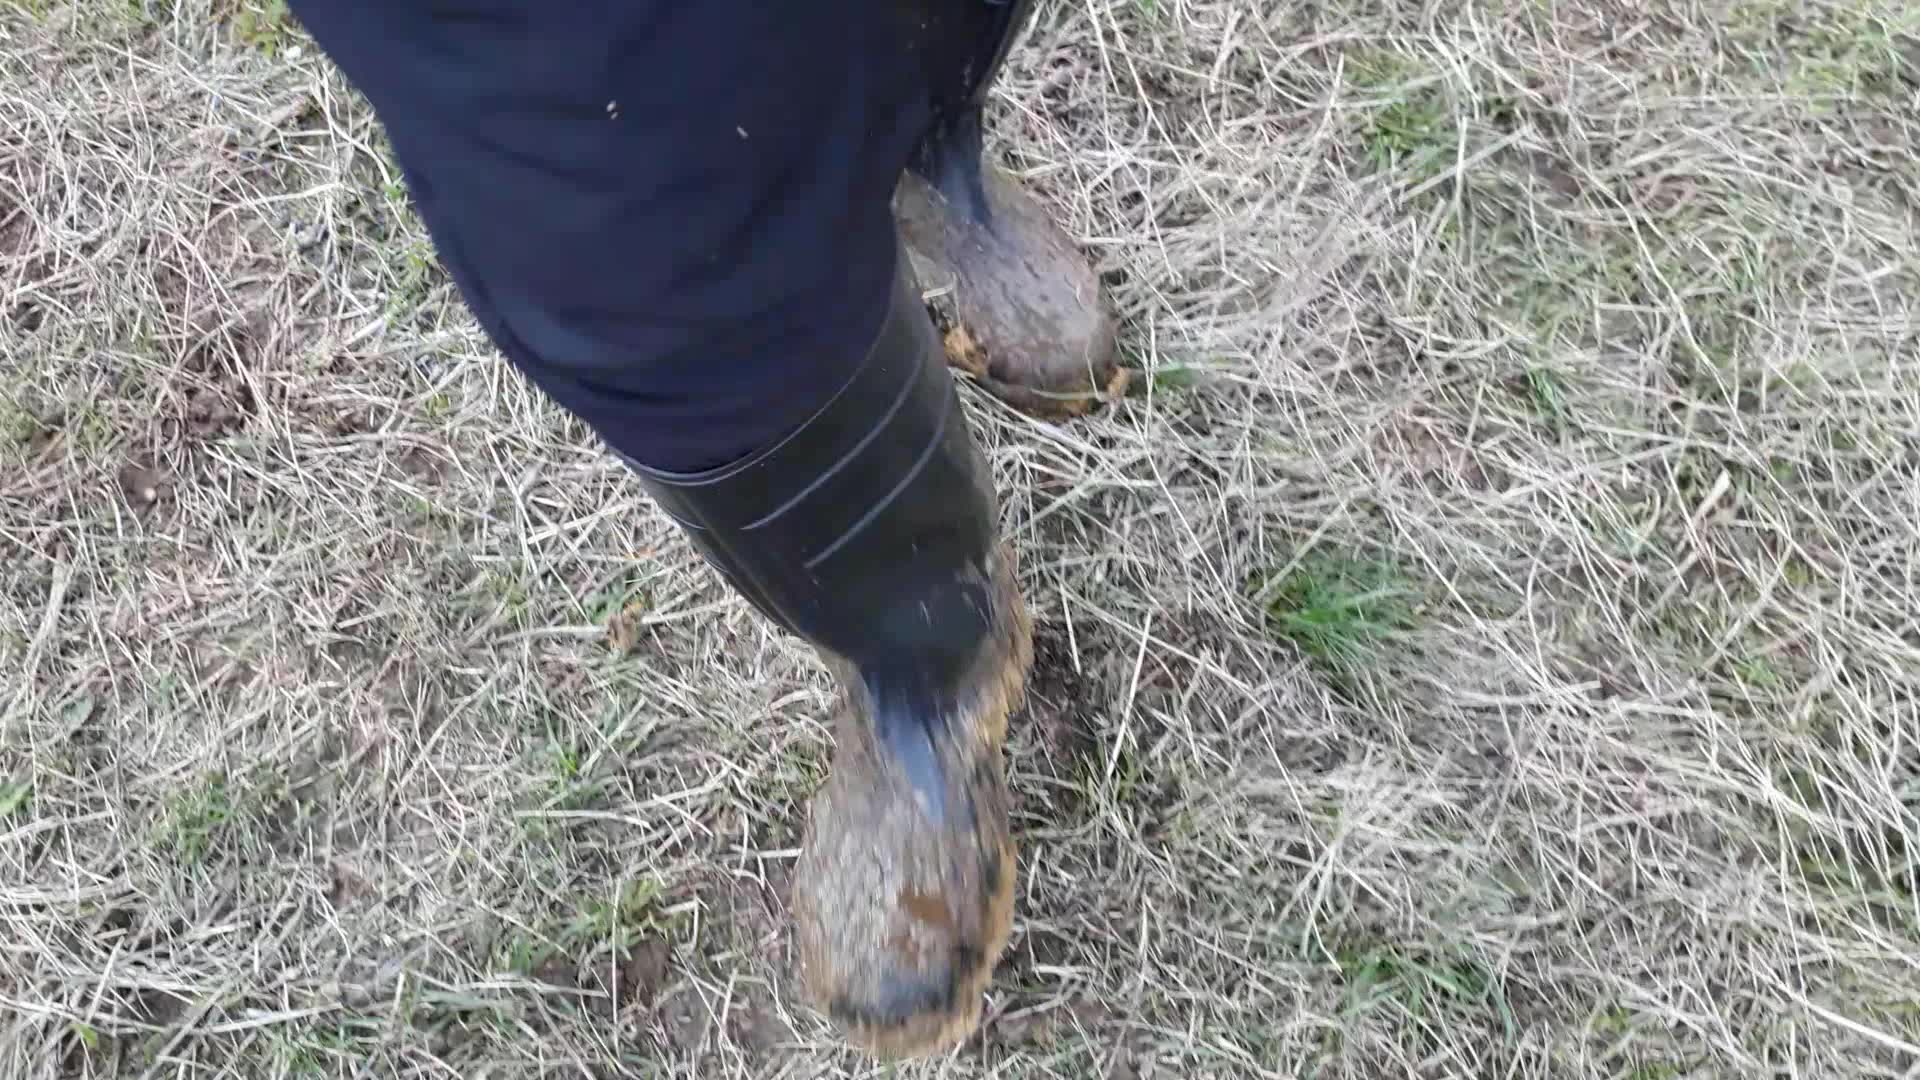 Rubber boots vs cowshit - video 18